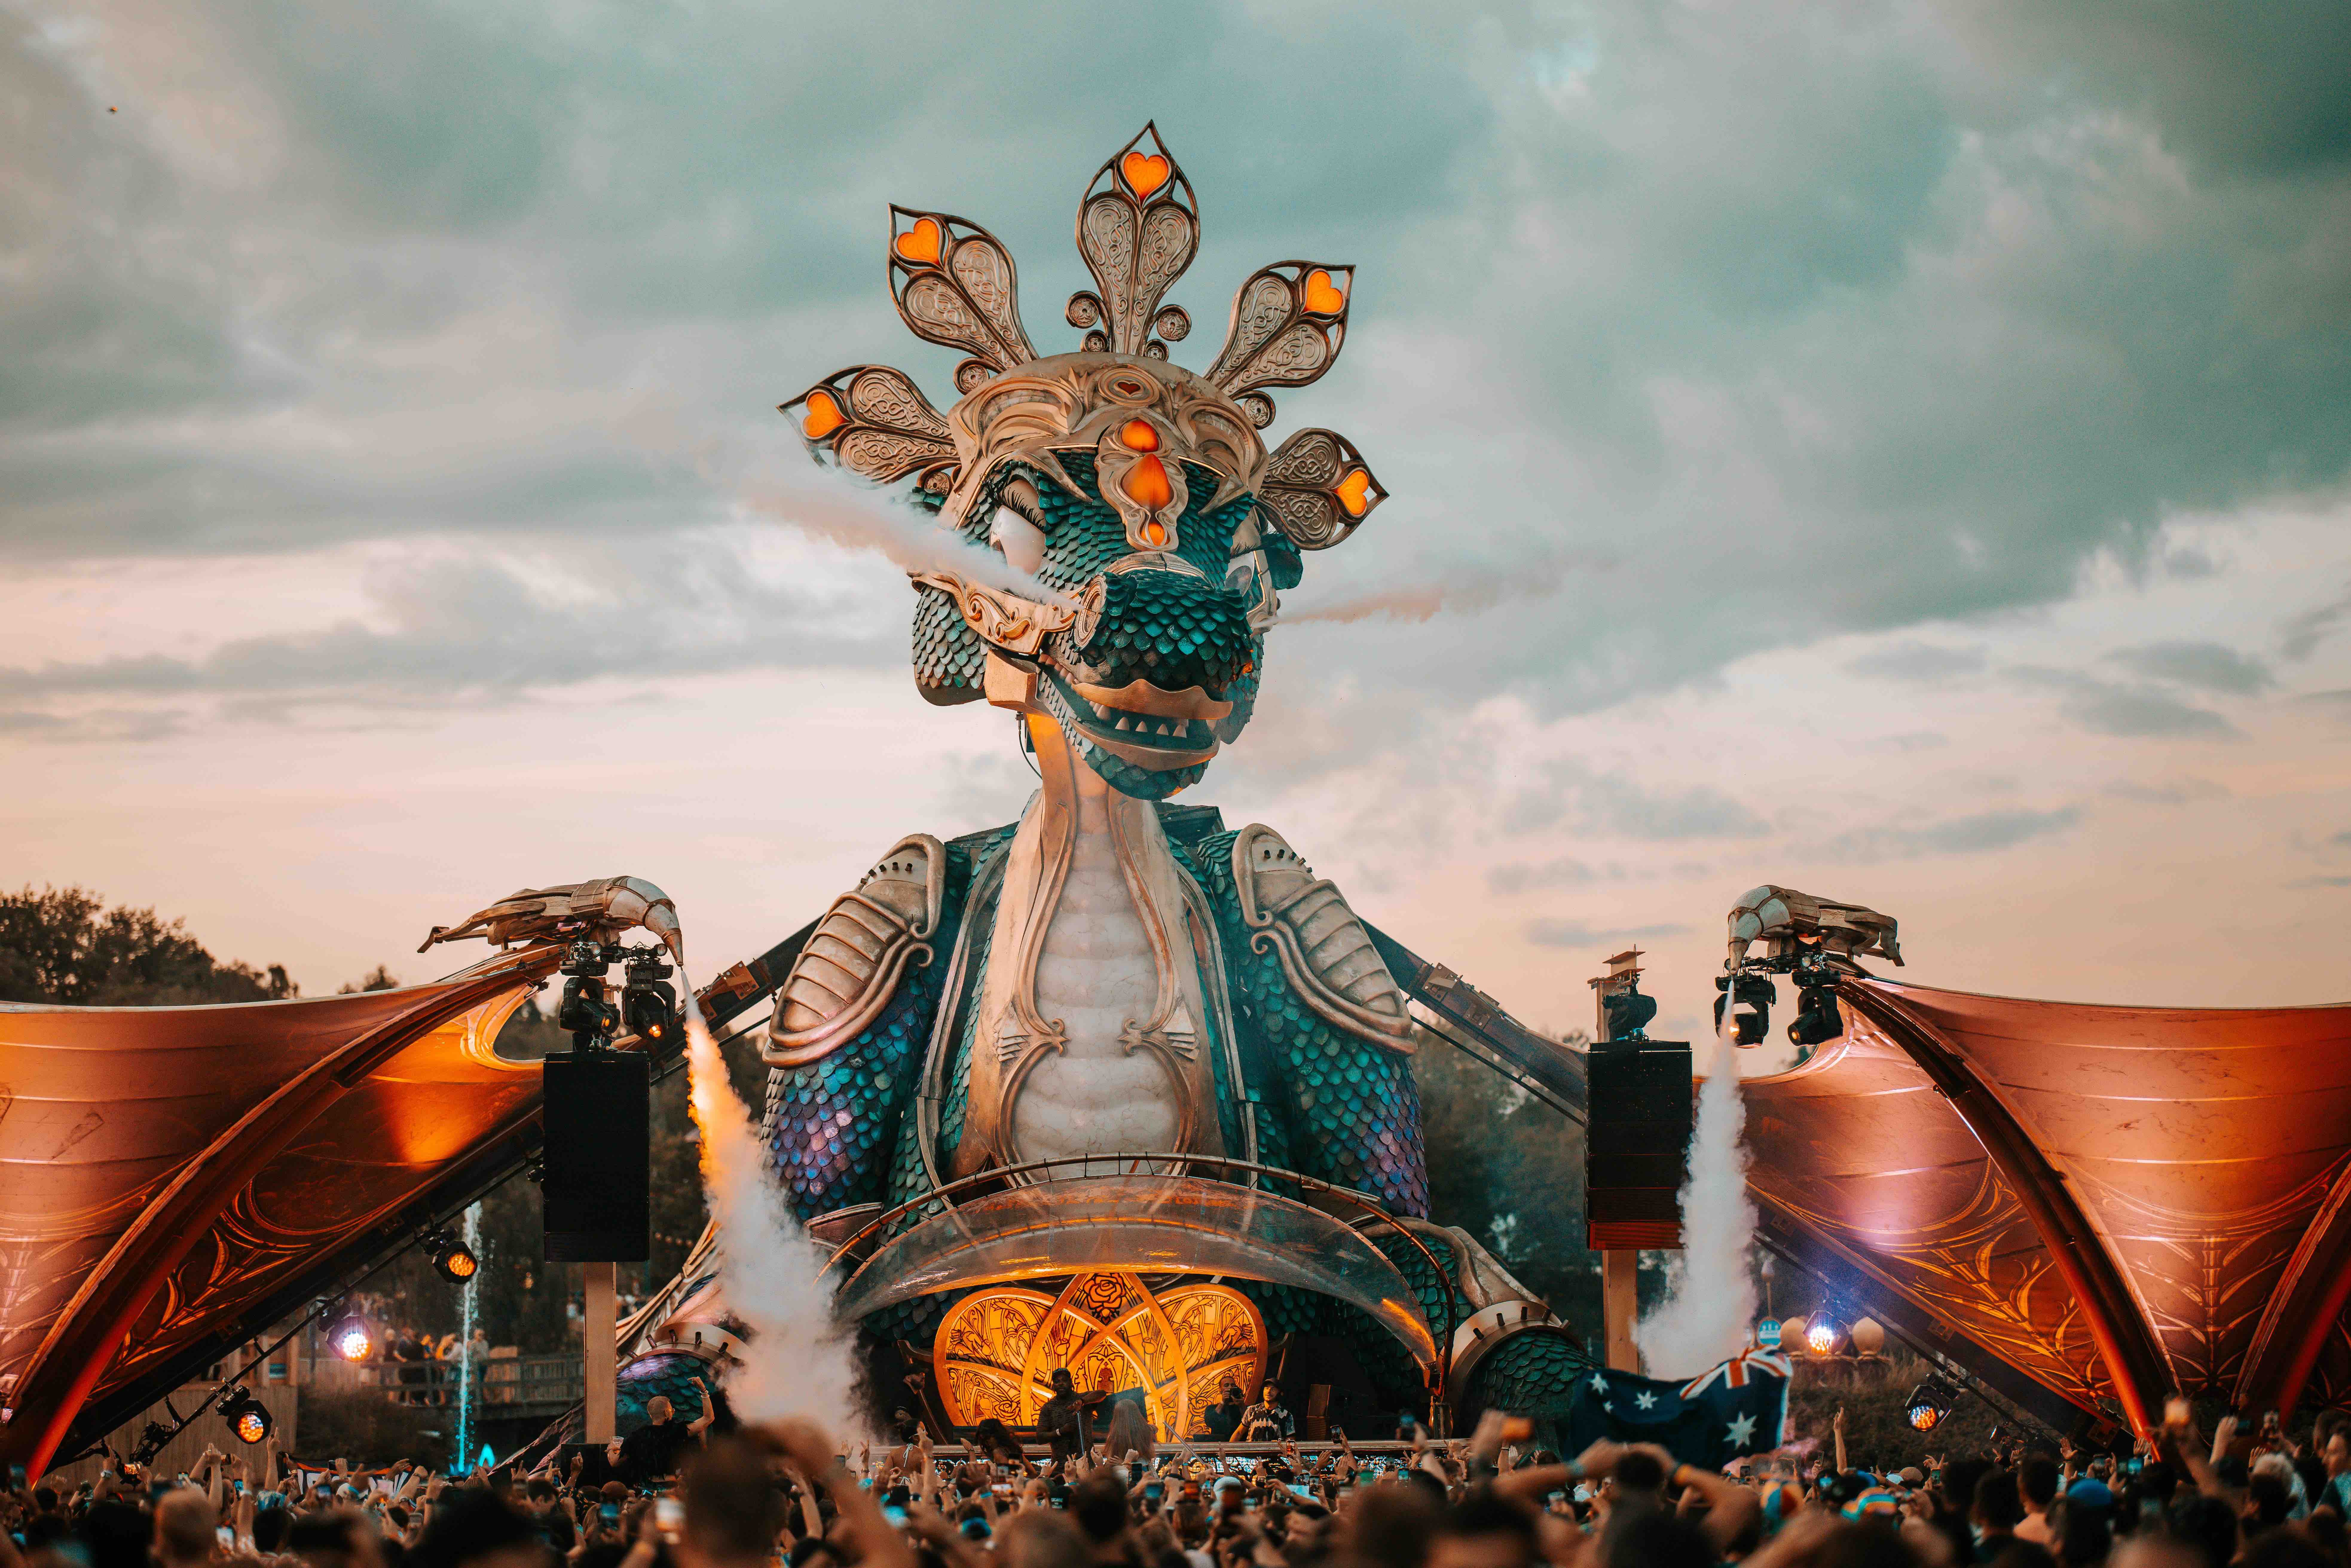 a large statue of a dragon with a crowd of people around it